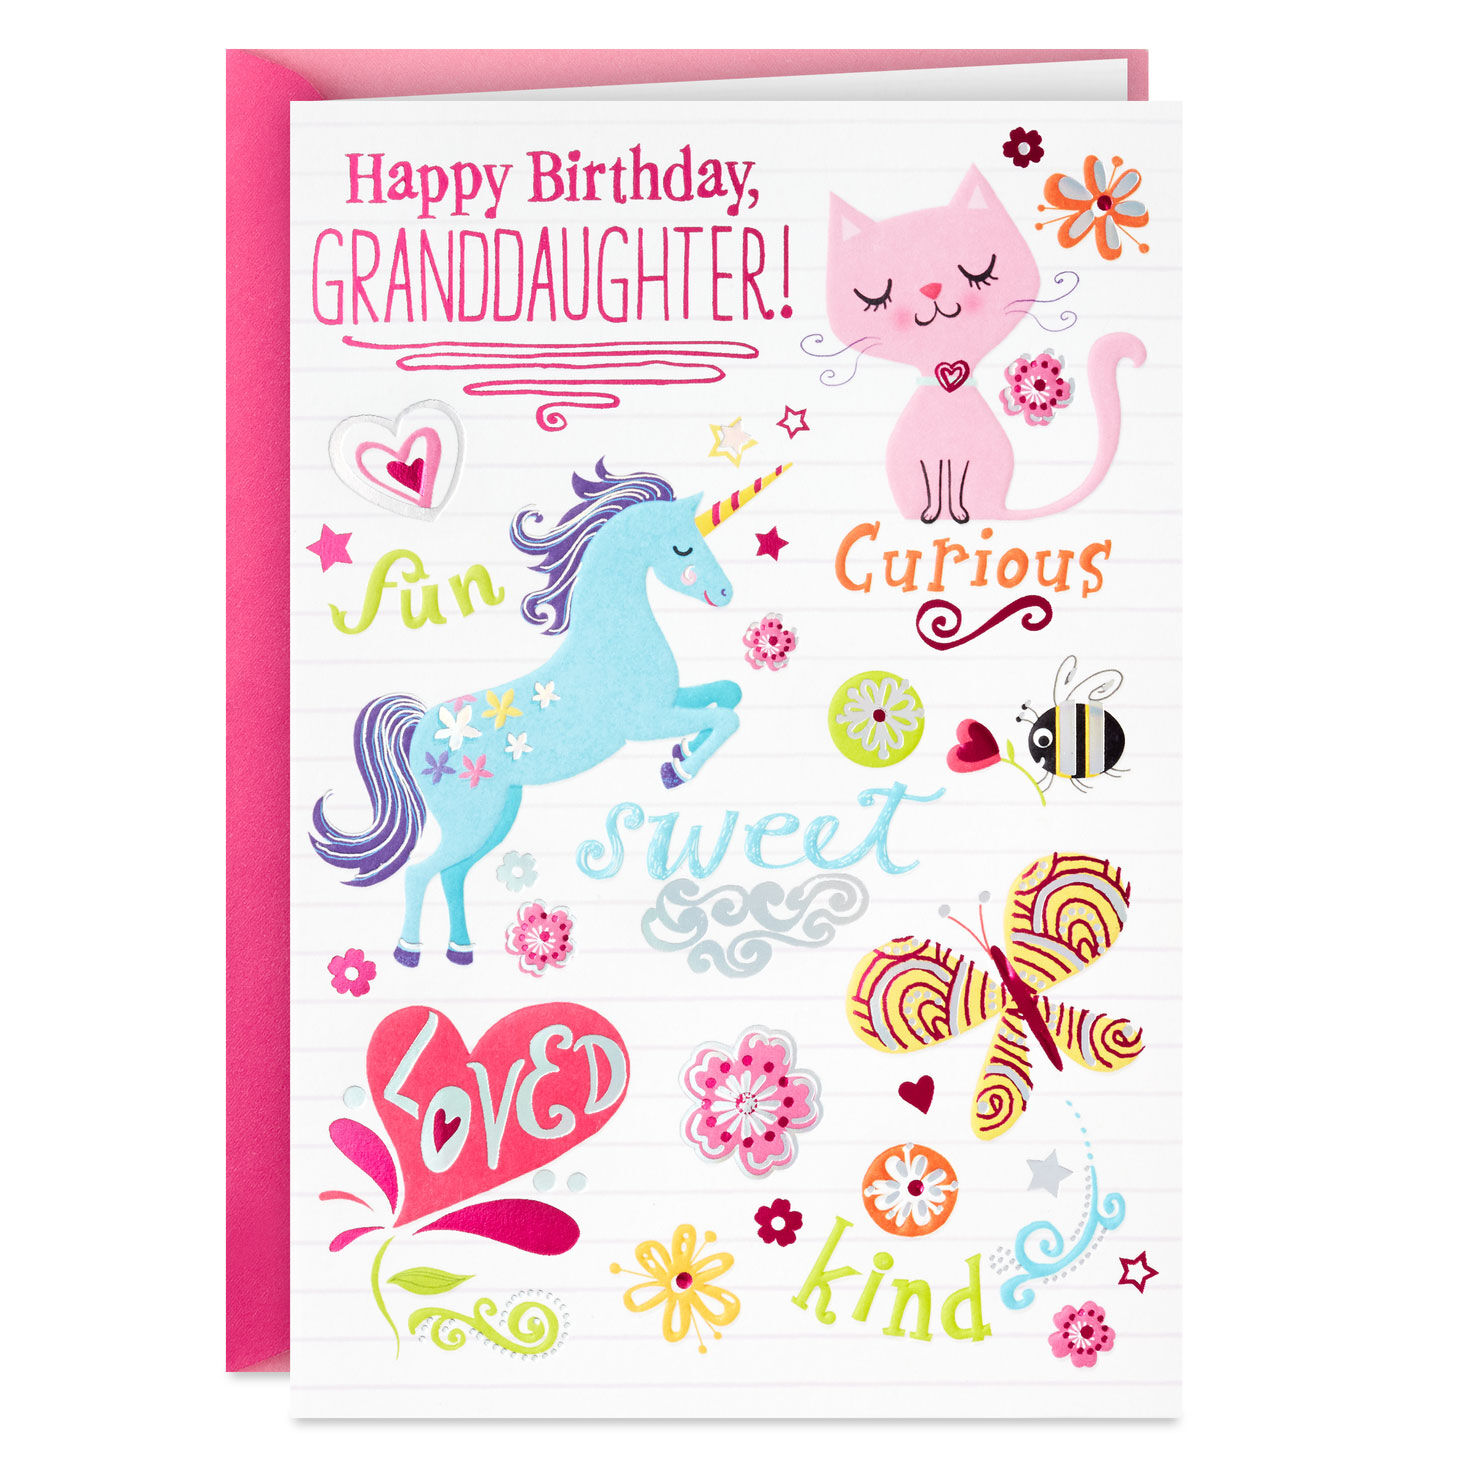 Happier, Brighter and Sweeter Birthday Card for Granddaughter for only USD 3.99 | Hallmark